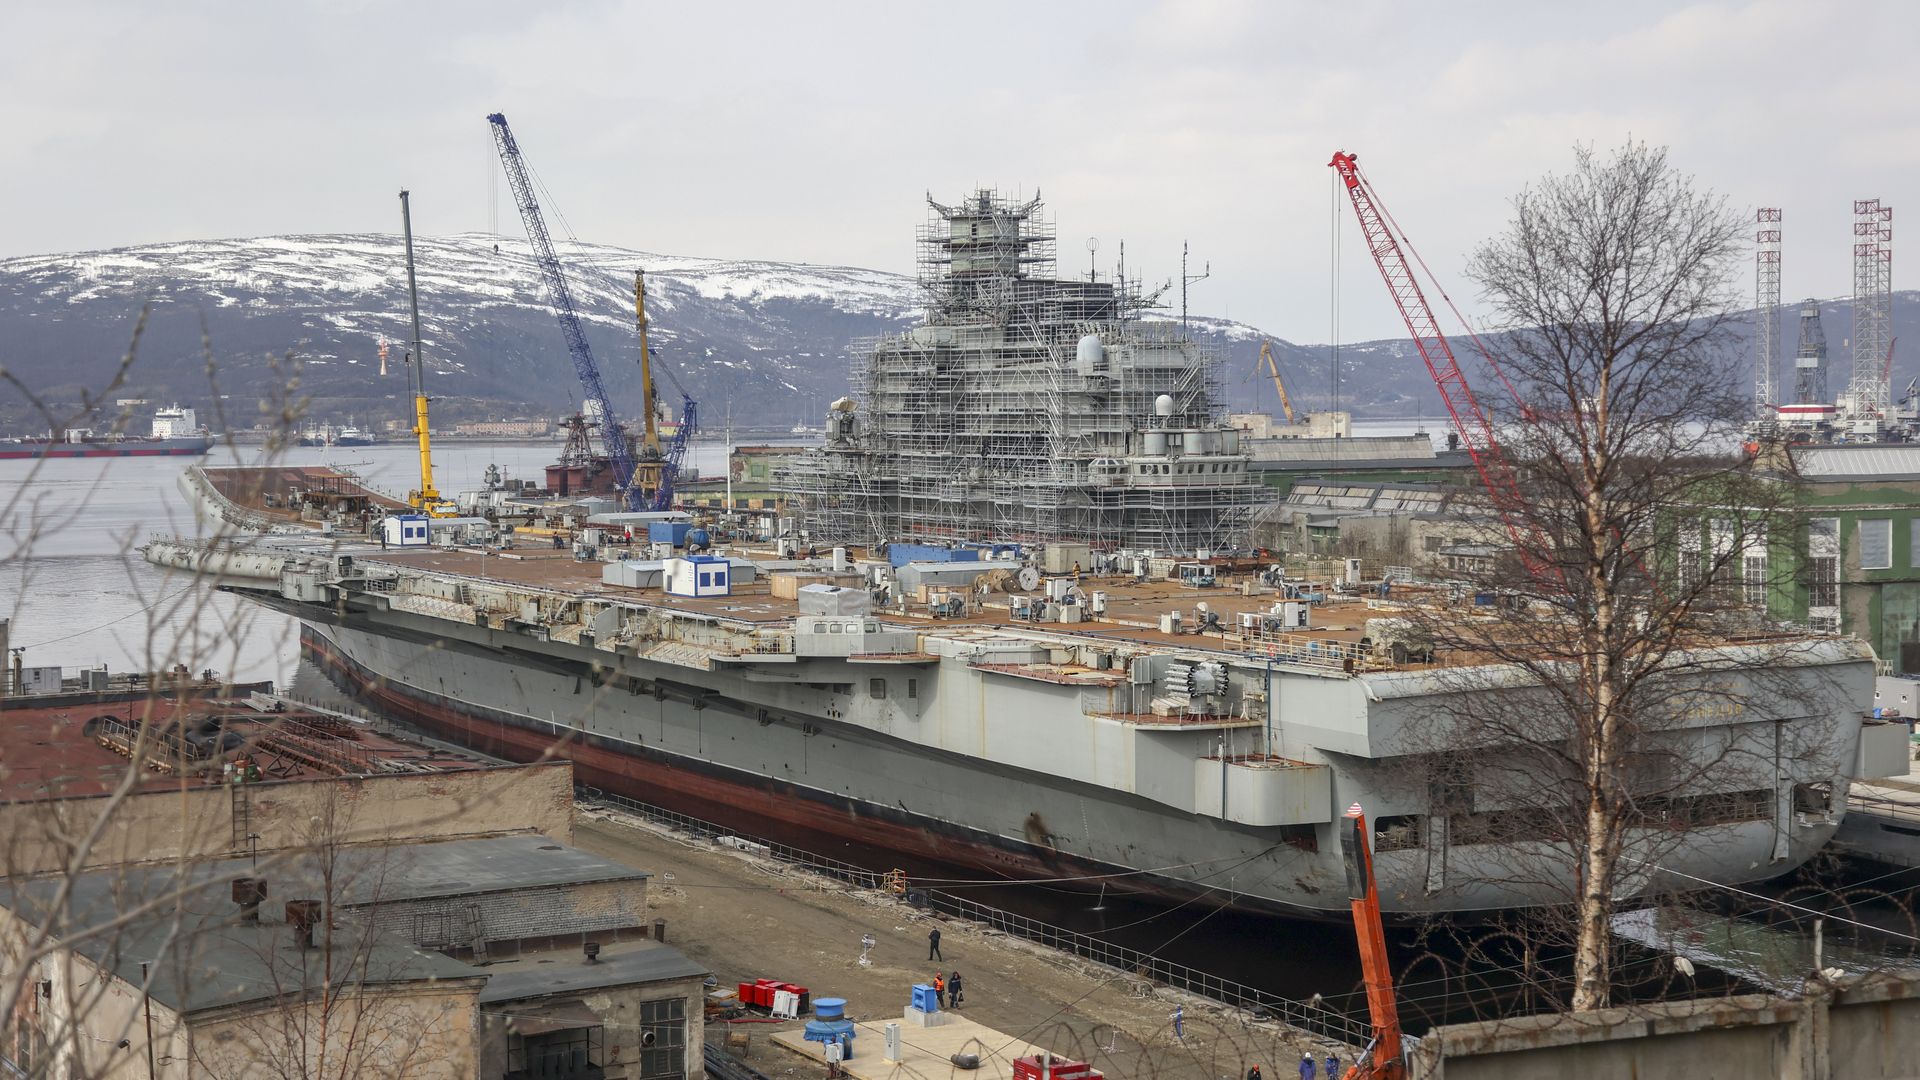 Admiral Kuznetso in a shipyard for maintenance and repair work in Murmansk, Russia, in May 2022.